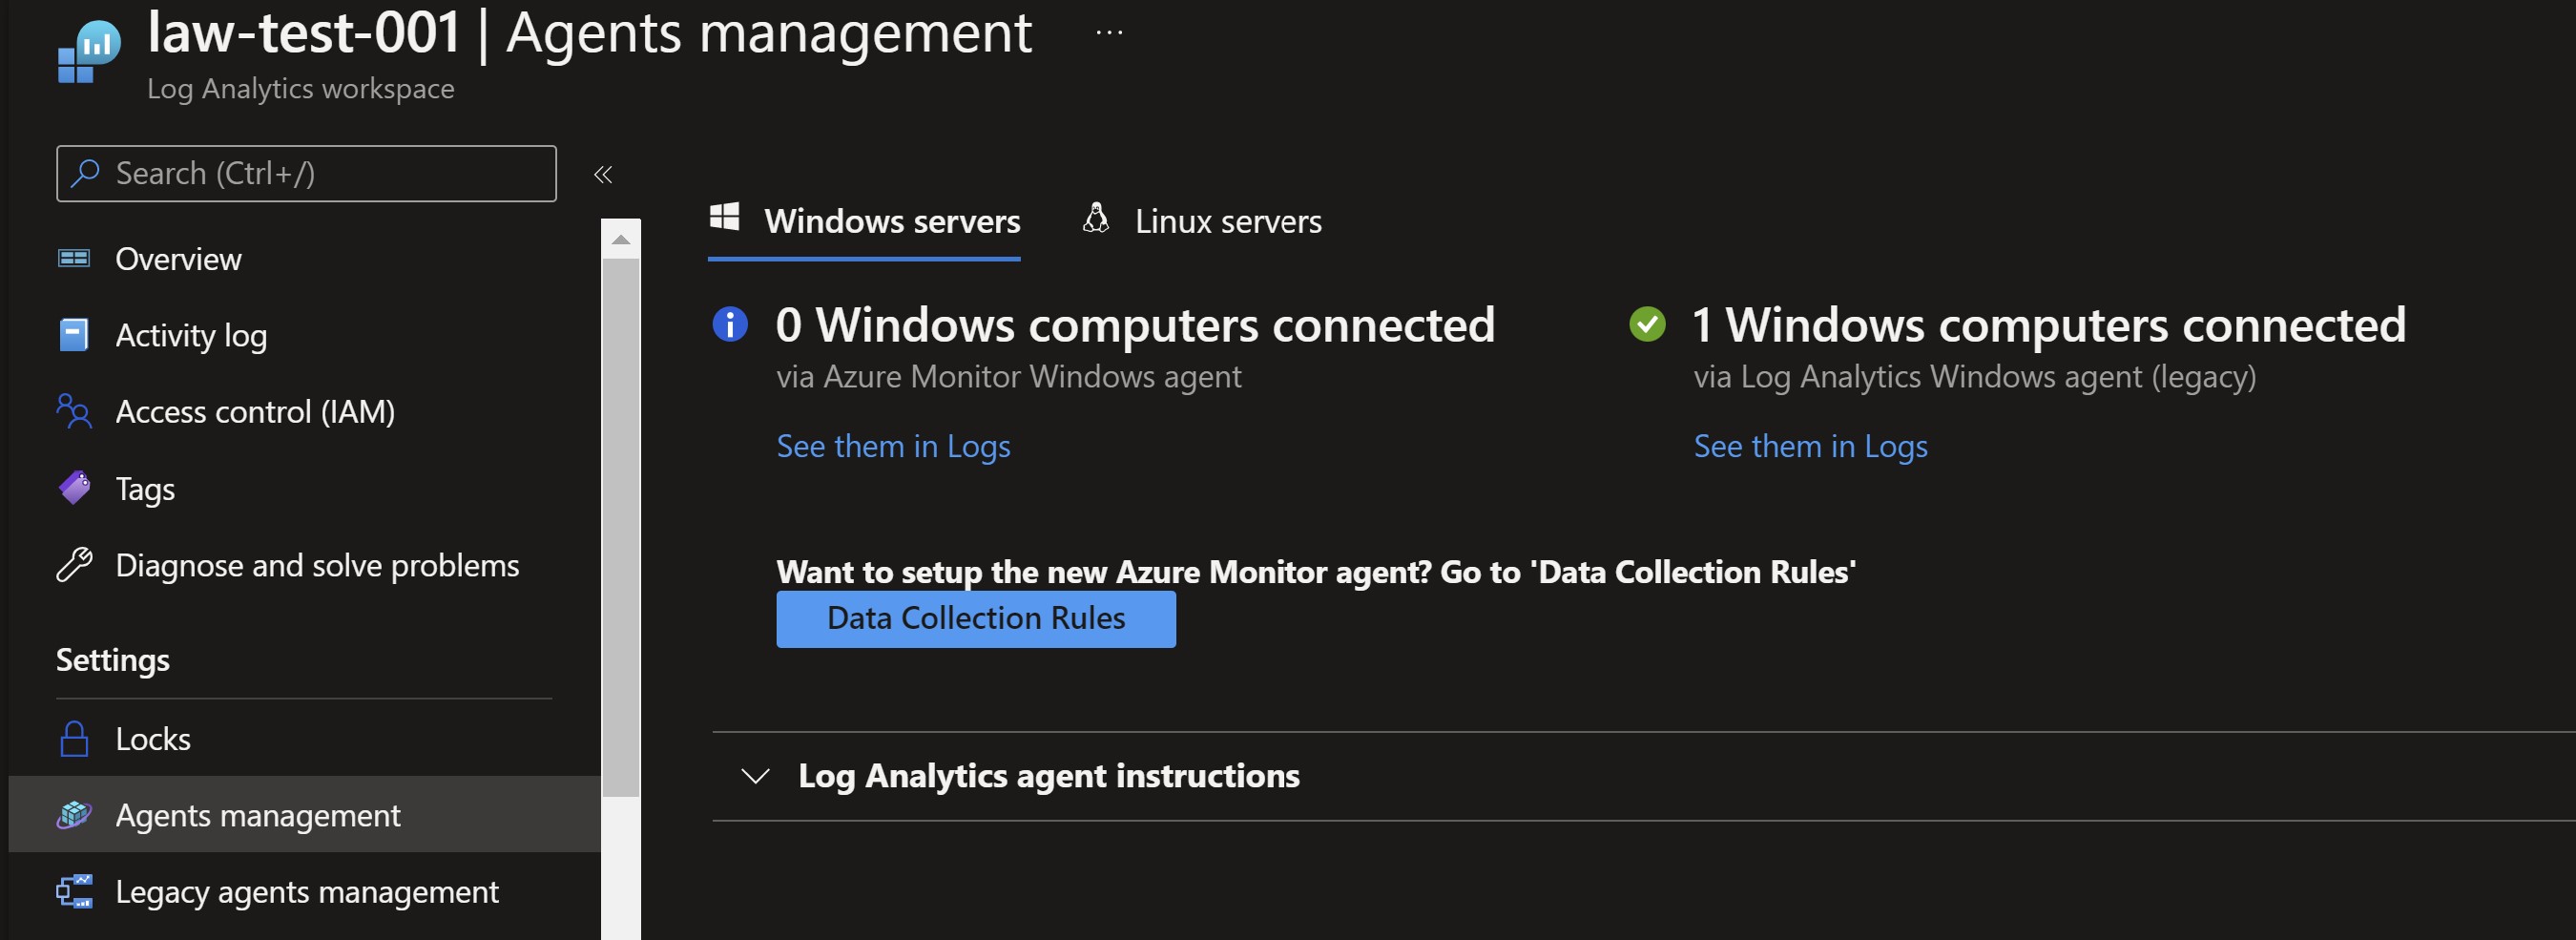 Screenshot showing the Windows VMs connected to the log analytics workspace